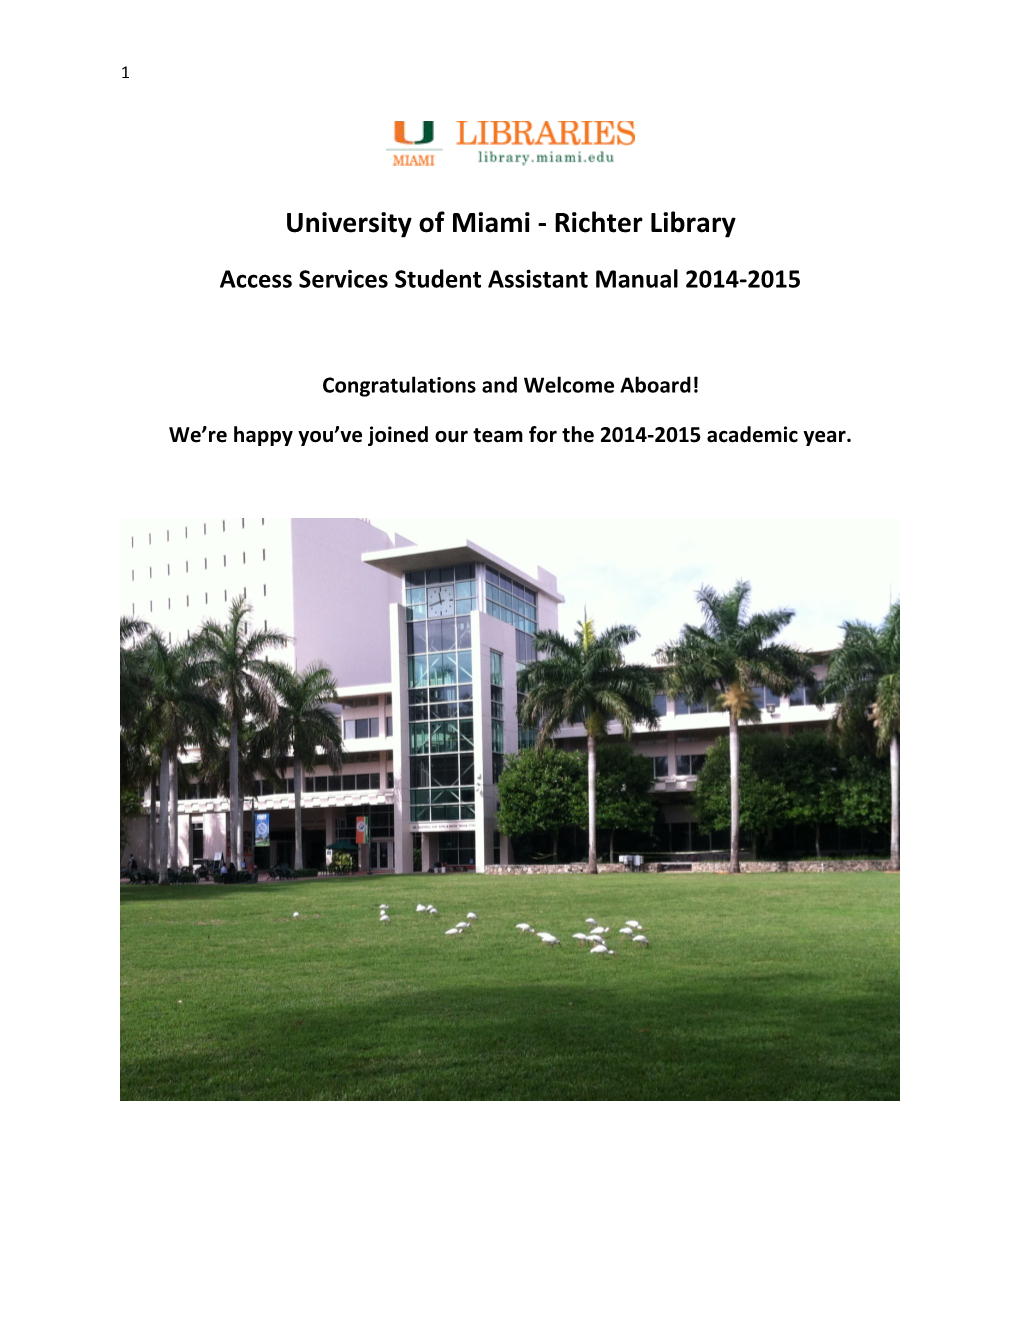 University of Miami - Richter Library